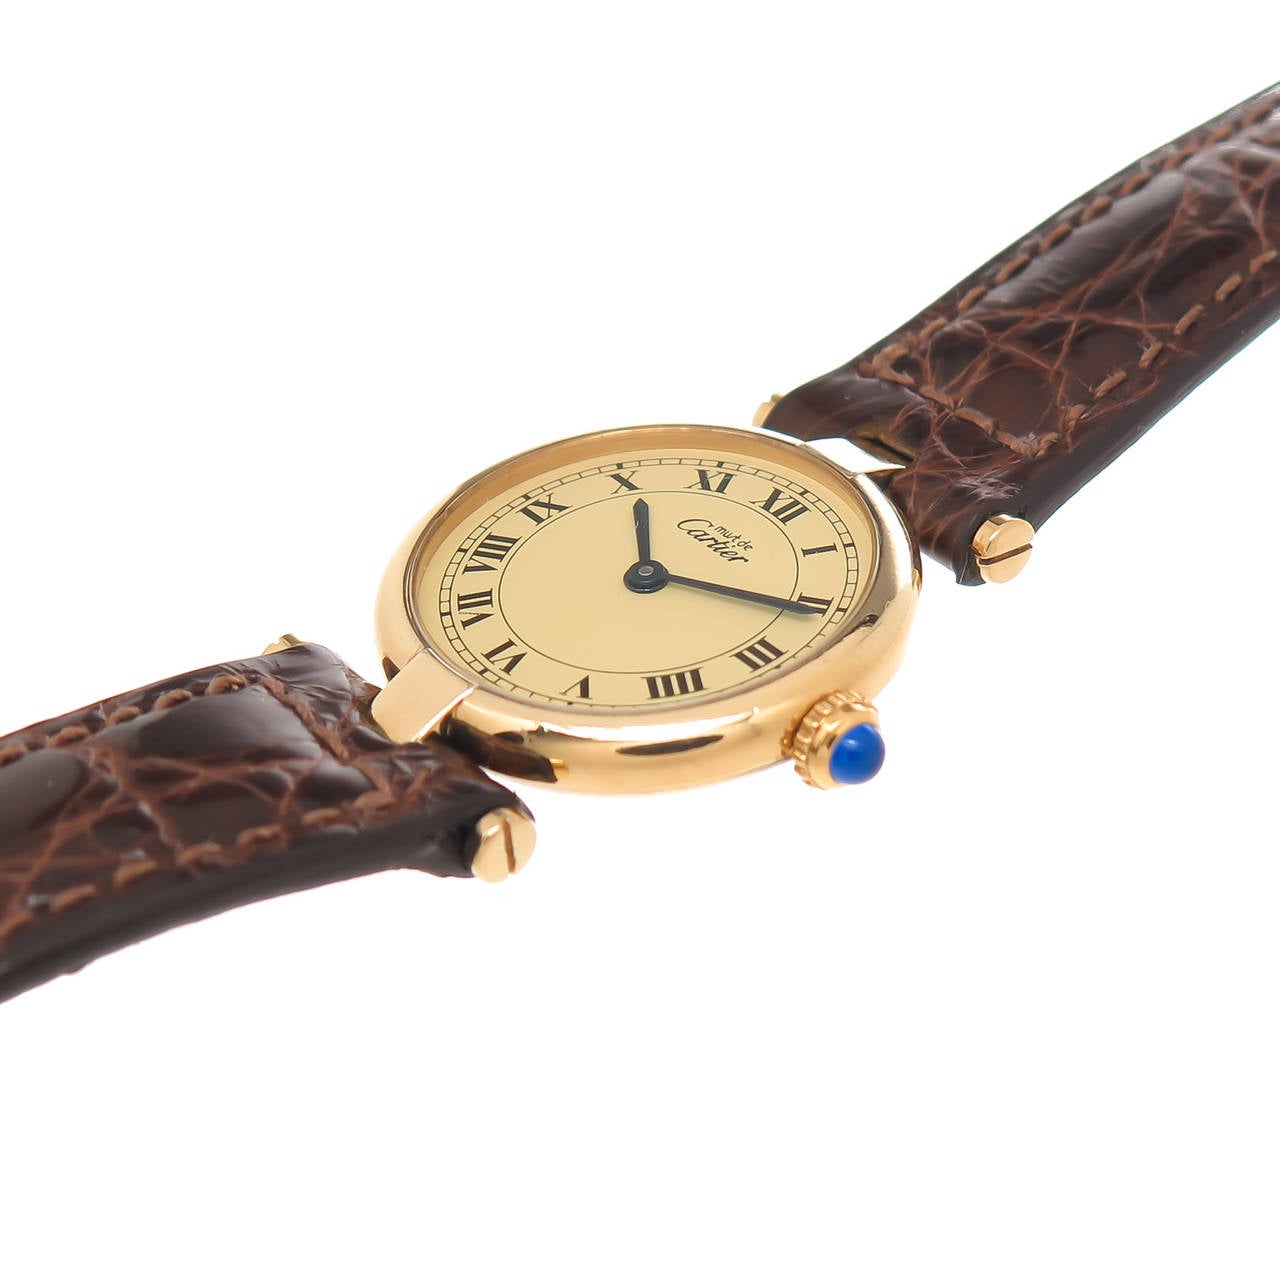 Circa 2000 Cartier, Must De Cartier Ronde Ladies Gold on Sterling Silver / Vermeil Wrist Watch. 24 MM Water Resistant case, Quartz Movement, Gold dial with Black Roman Numerals, Sapphire Crown. New Cartier Brown Croco Strap with Gold Plate Cartier